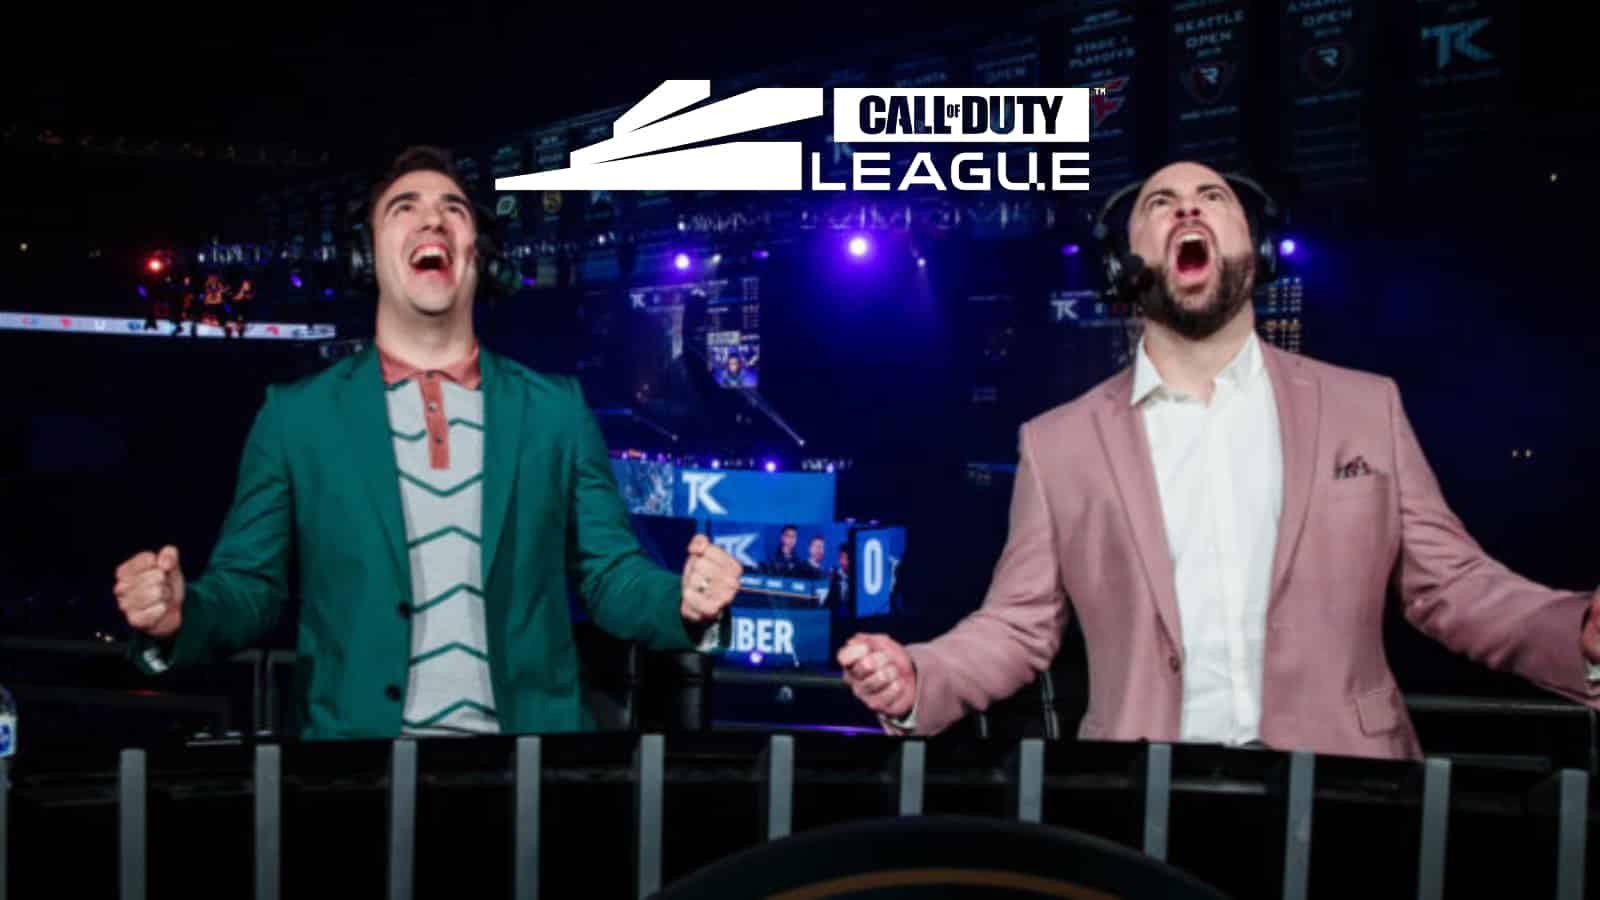 CoD casters Merk & Maven to miss CDL Kickoff Classic amid 2022 contract issues